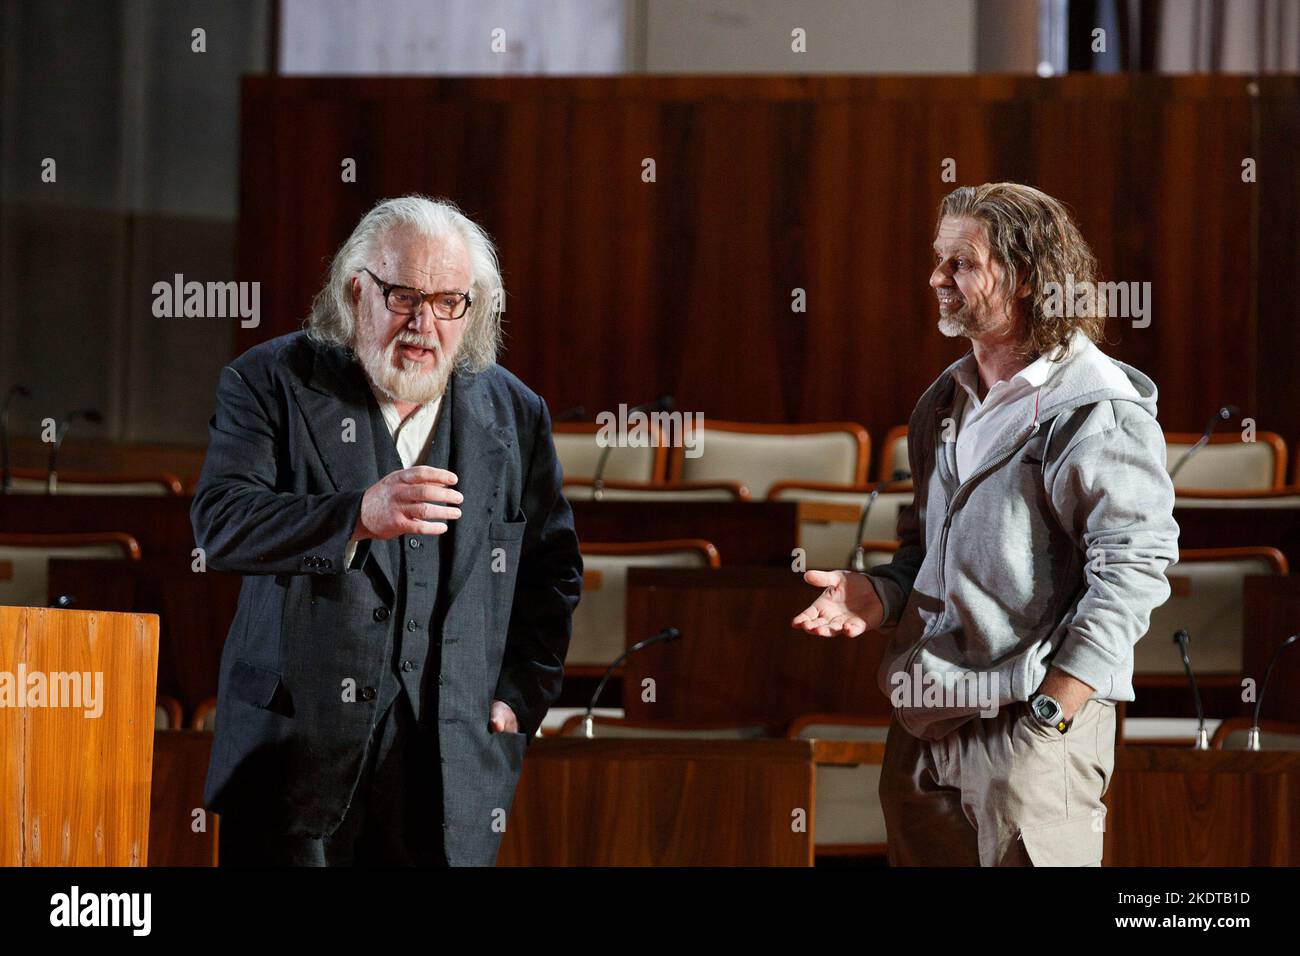 l-r: John Tomlinson (Moses), Rainer Trost (Aron) in MOSES UND ARON by Schoenberg at Welsh National Opera (WNO), Wales Millennium Centre, Cardiff, Wales  24/05/2014  conductor: Lother Koenigs  design: Anna Viebrock  lighting: Tim Mitchell  directors: Jossi Wieler & Sergio Morabito Stock Photo